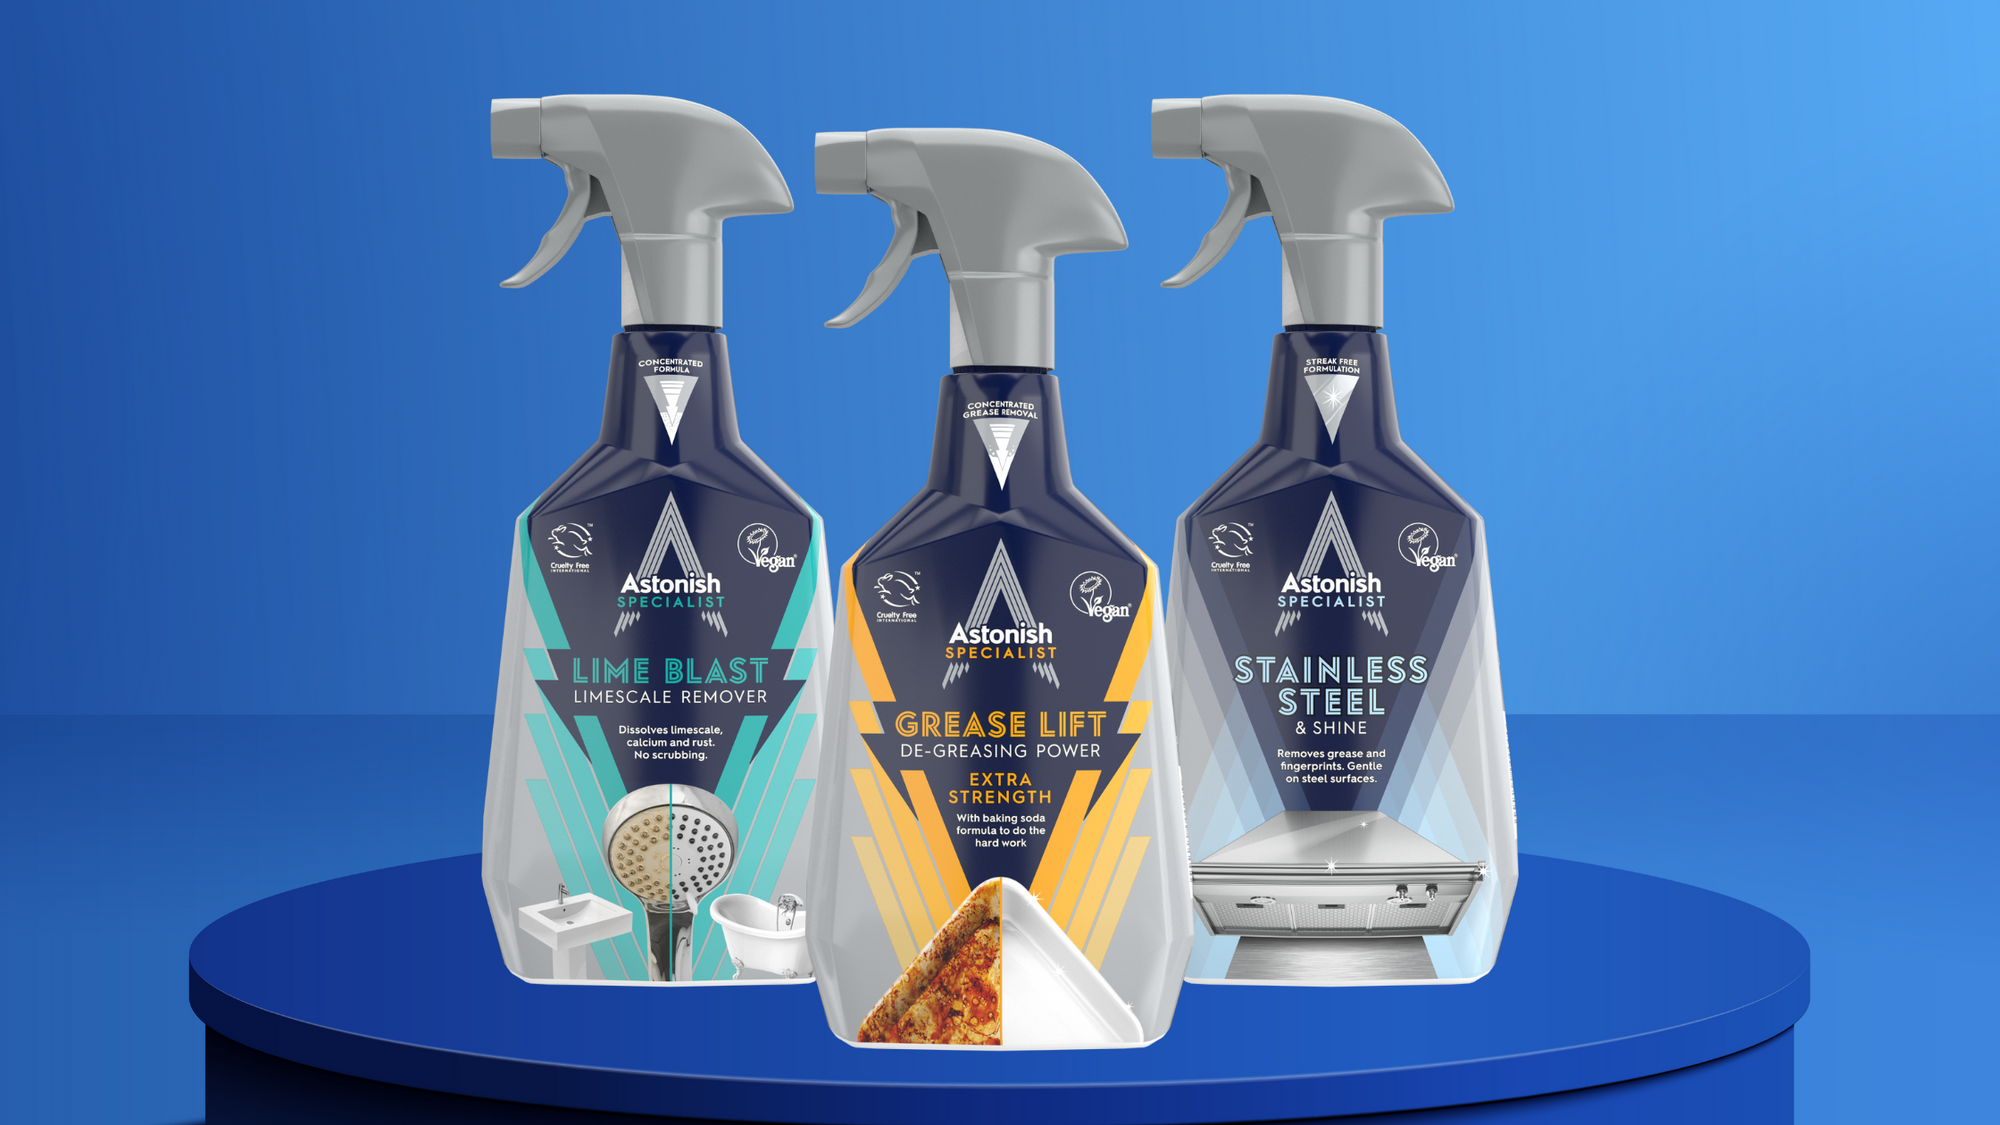 Introducing Astonish's 3 New Powerful Cleaners